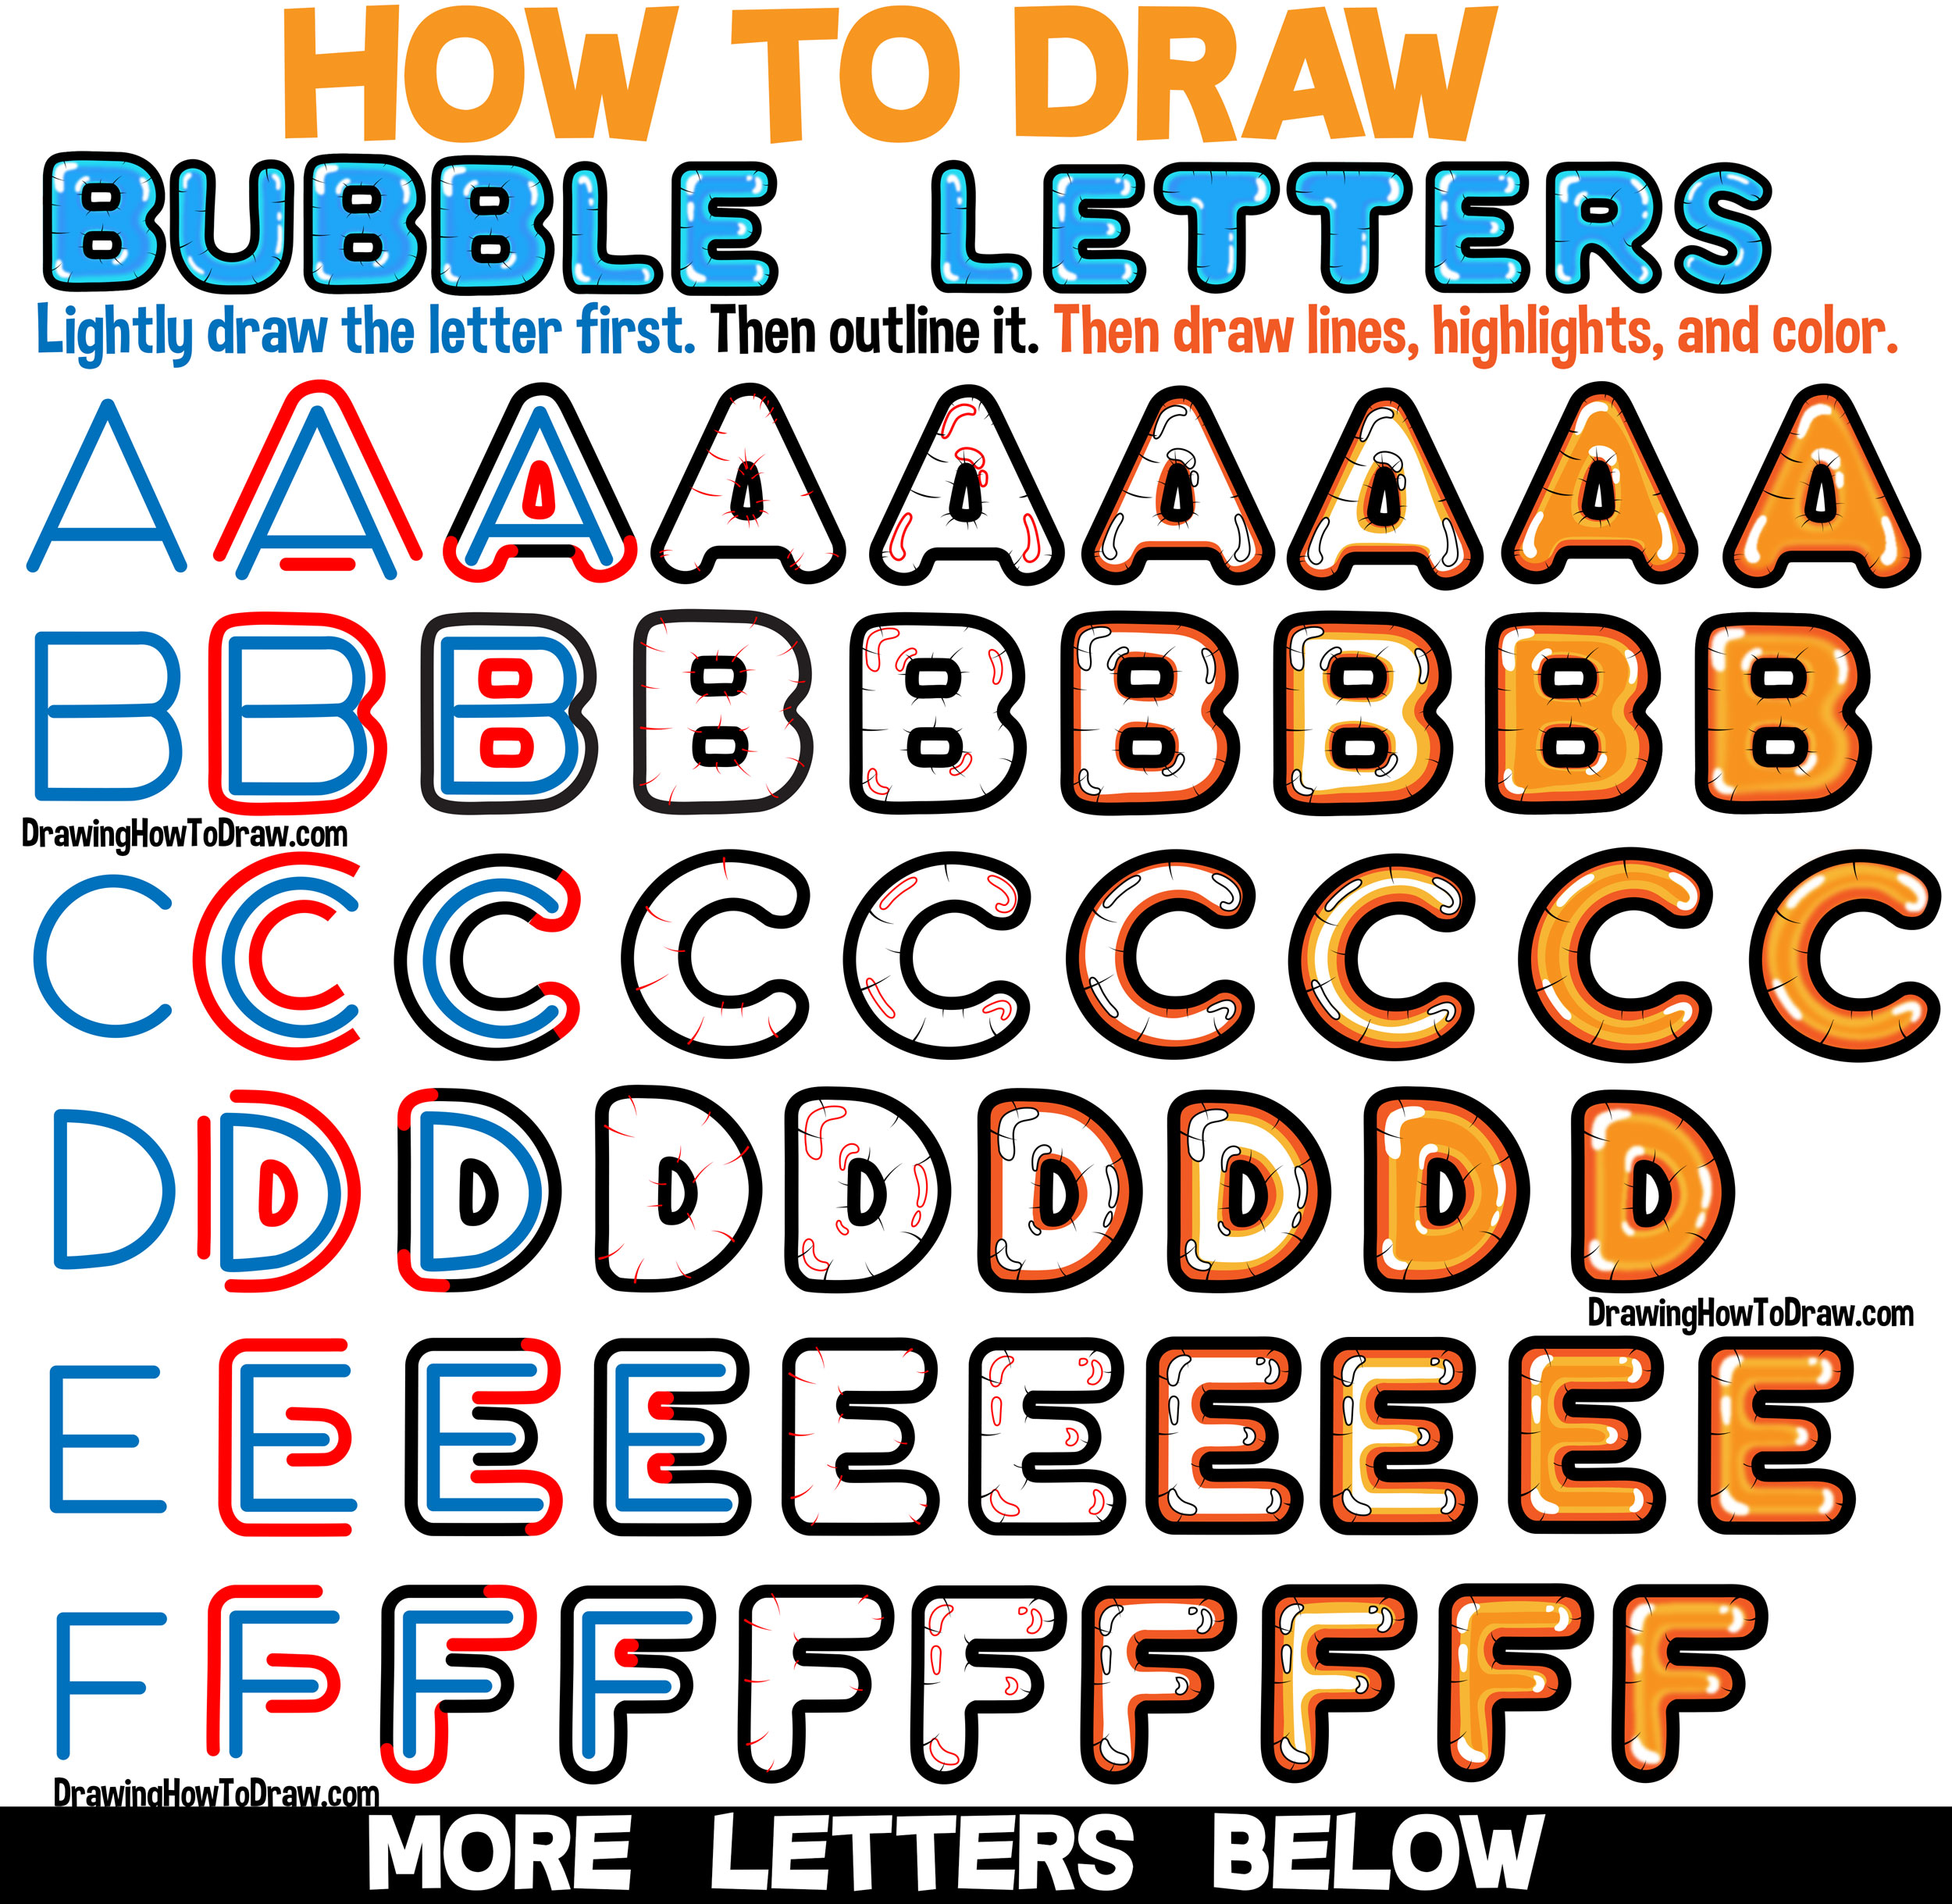 Learn How to Draw Bubble Balloon Letters in Easy Step by Step Drawing Tutorial for Beginners